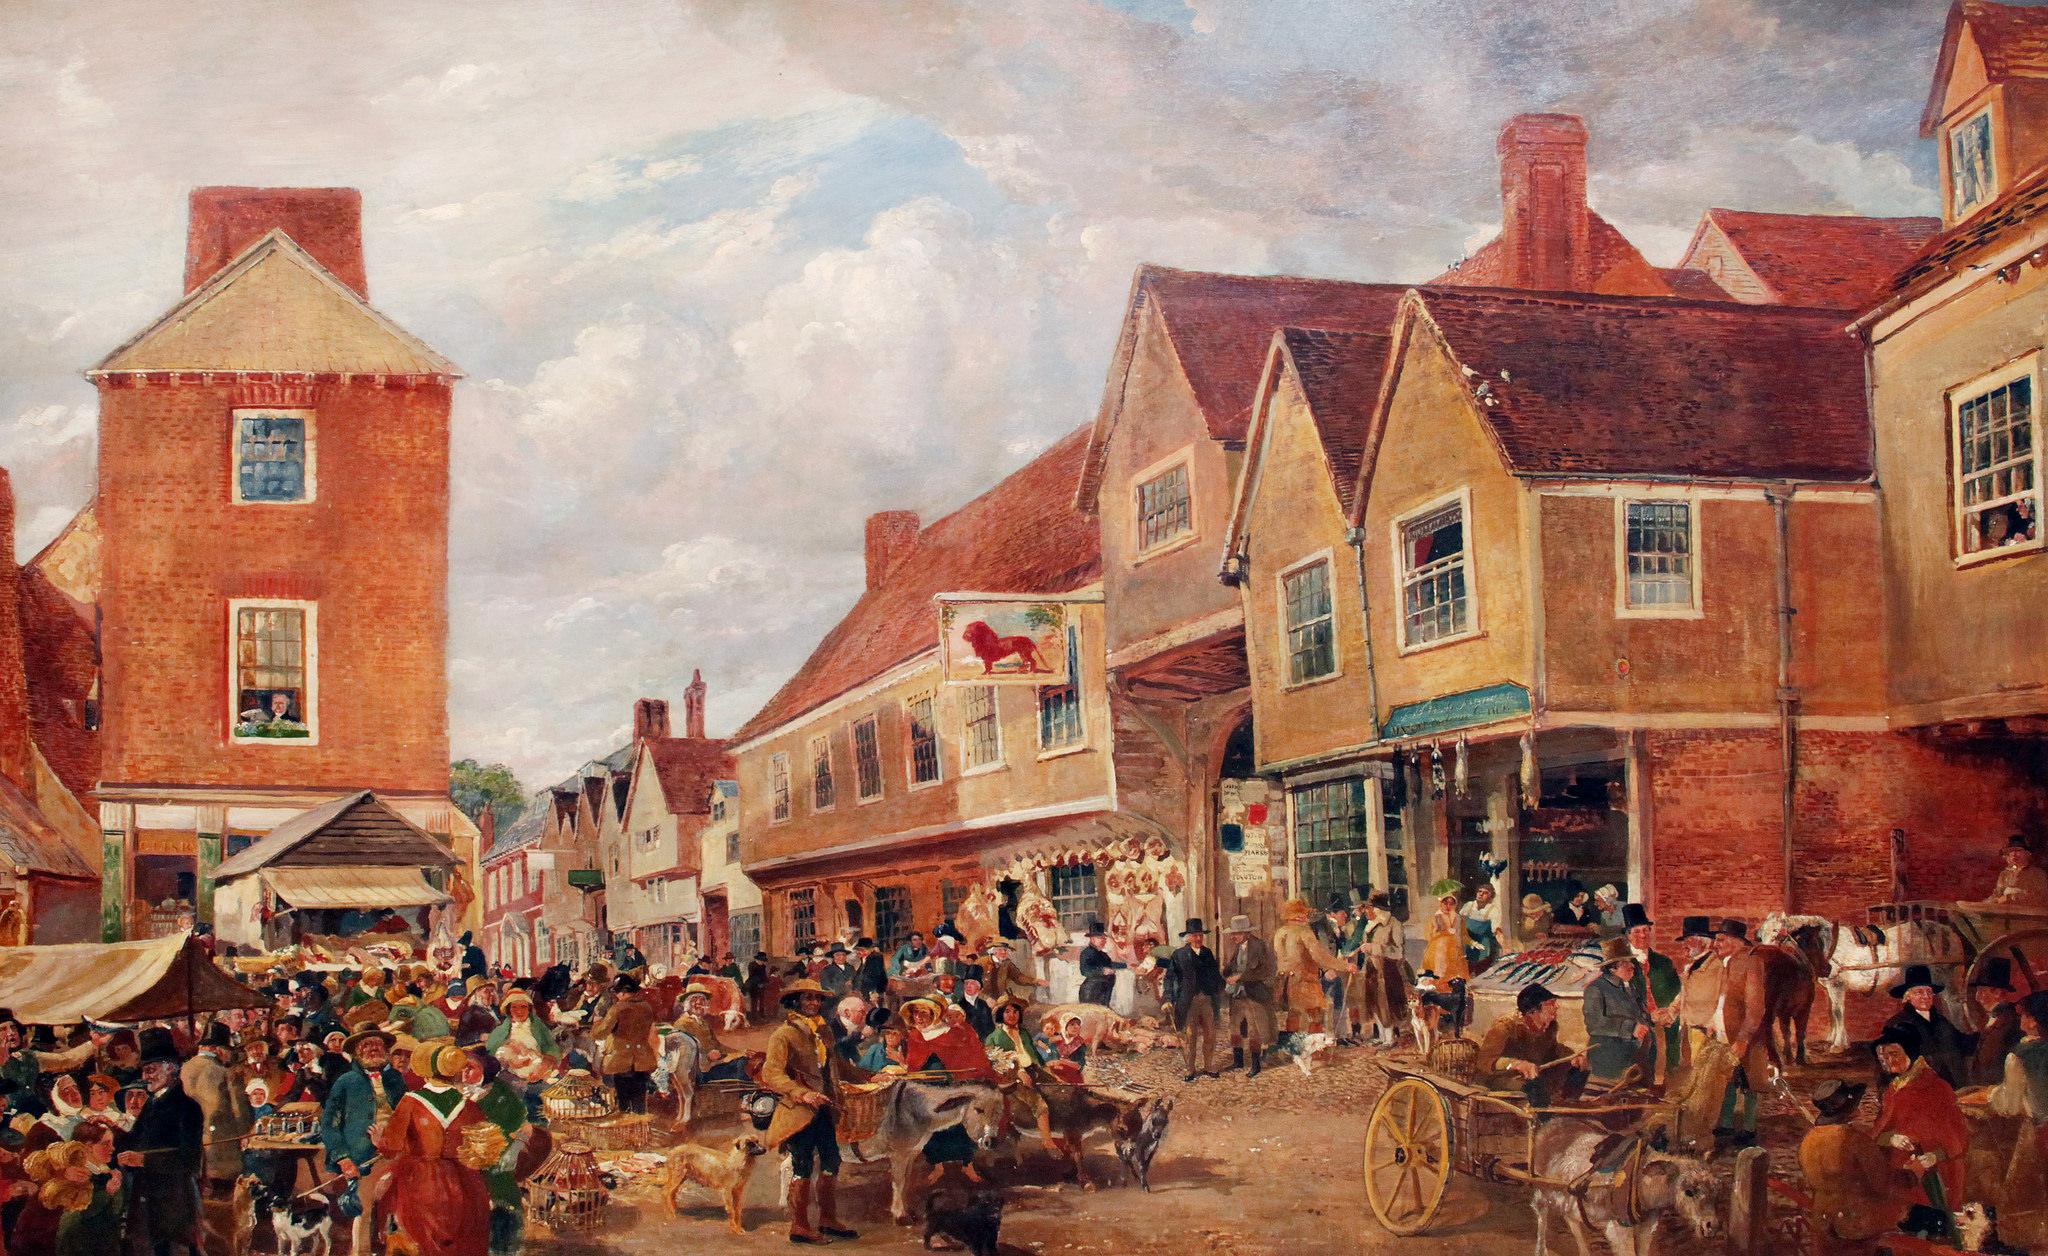 Hitchin Marketplace oil painting by Samuel Lucas, 1840